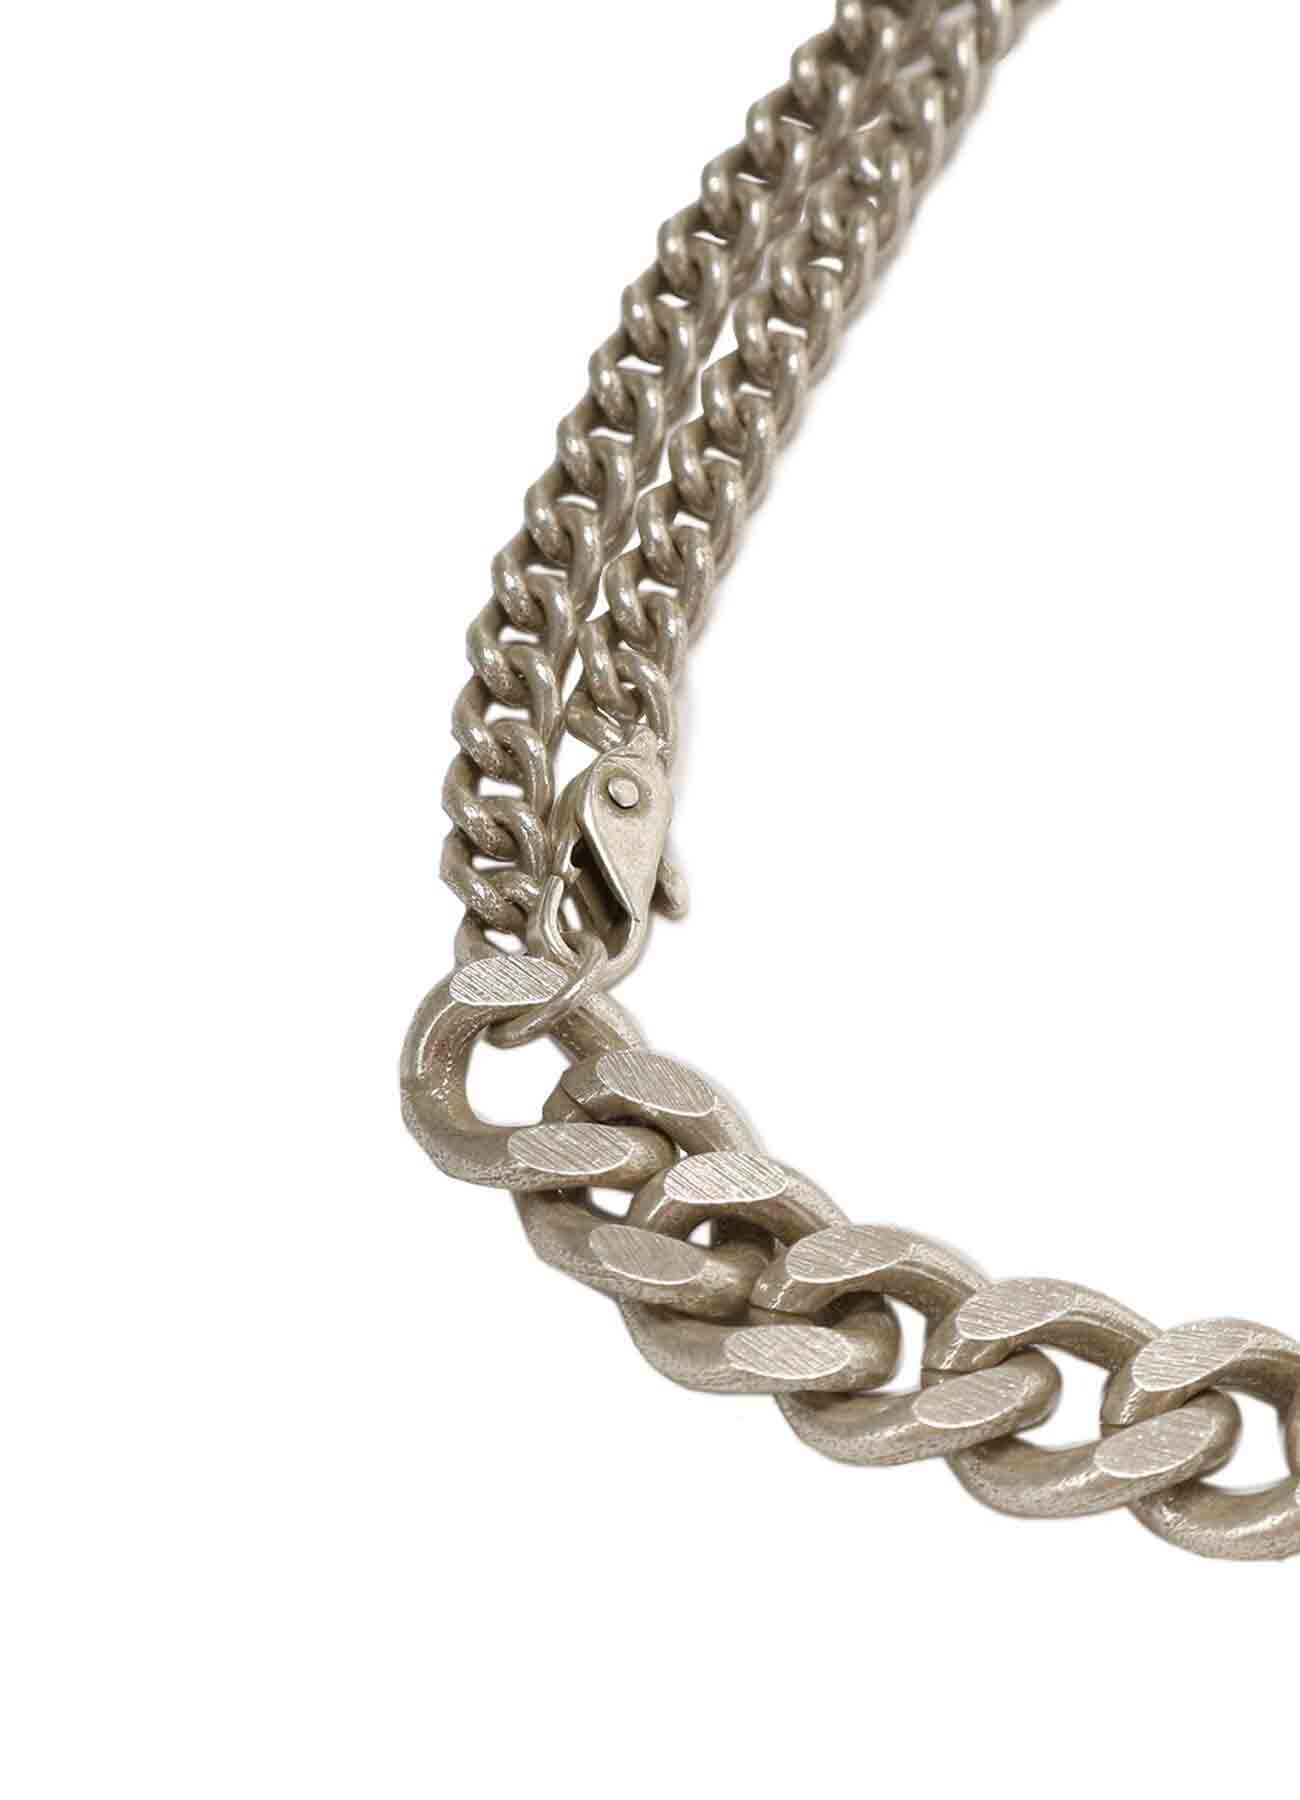 6-WAY CURVED CHAIN BRACELET NECKLACE